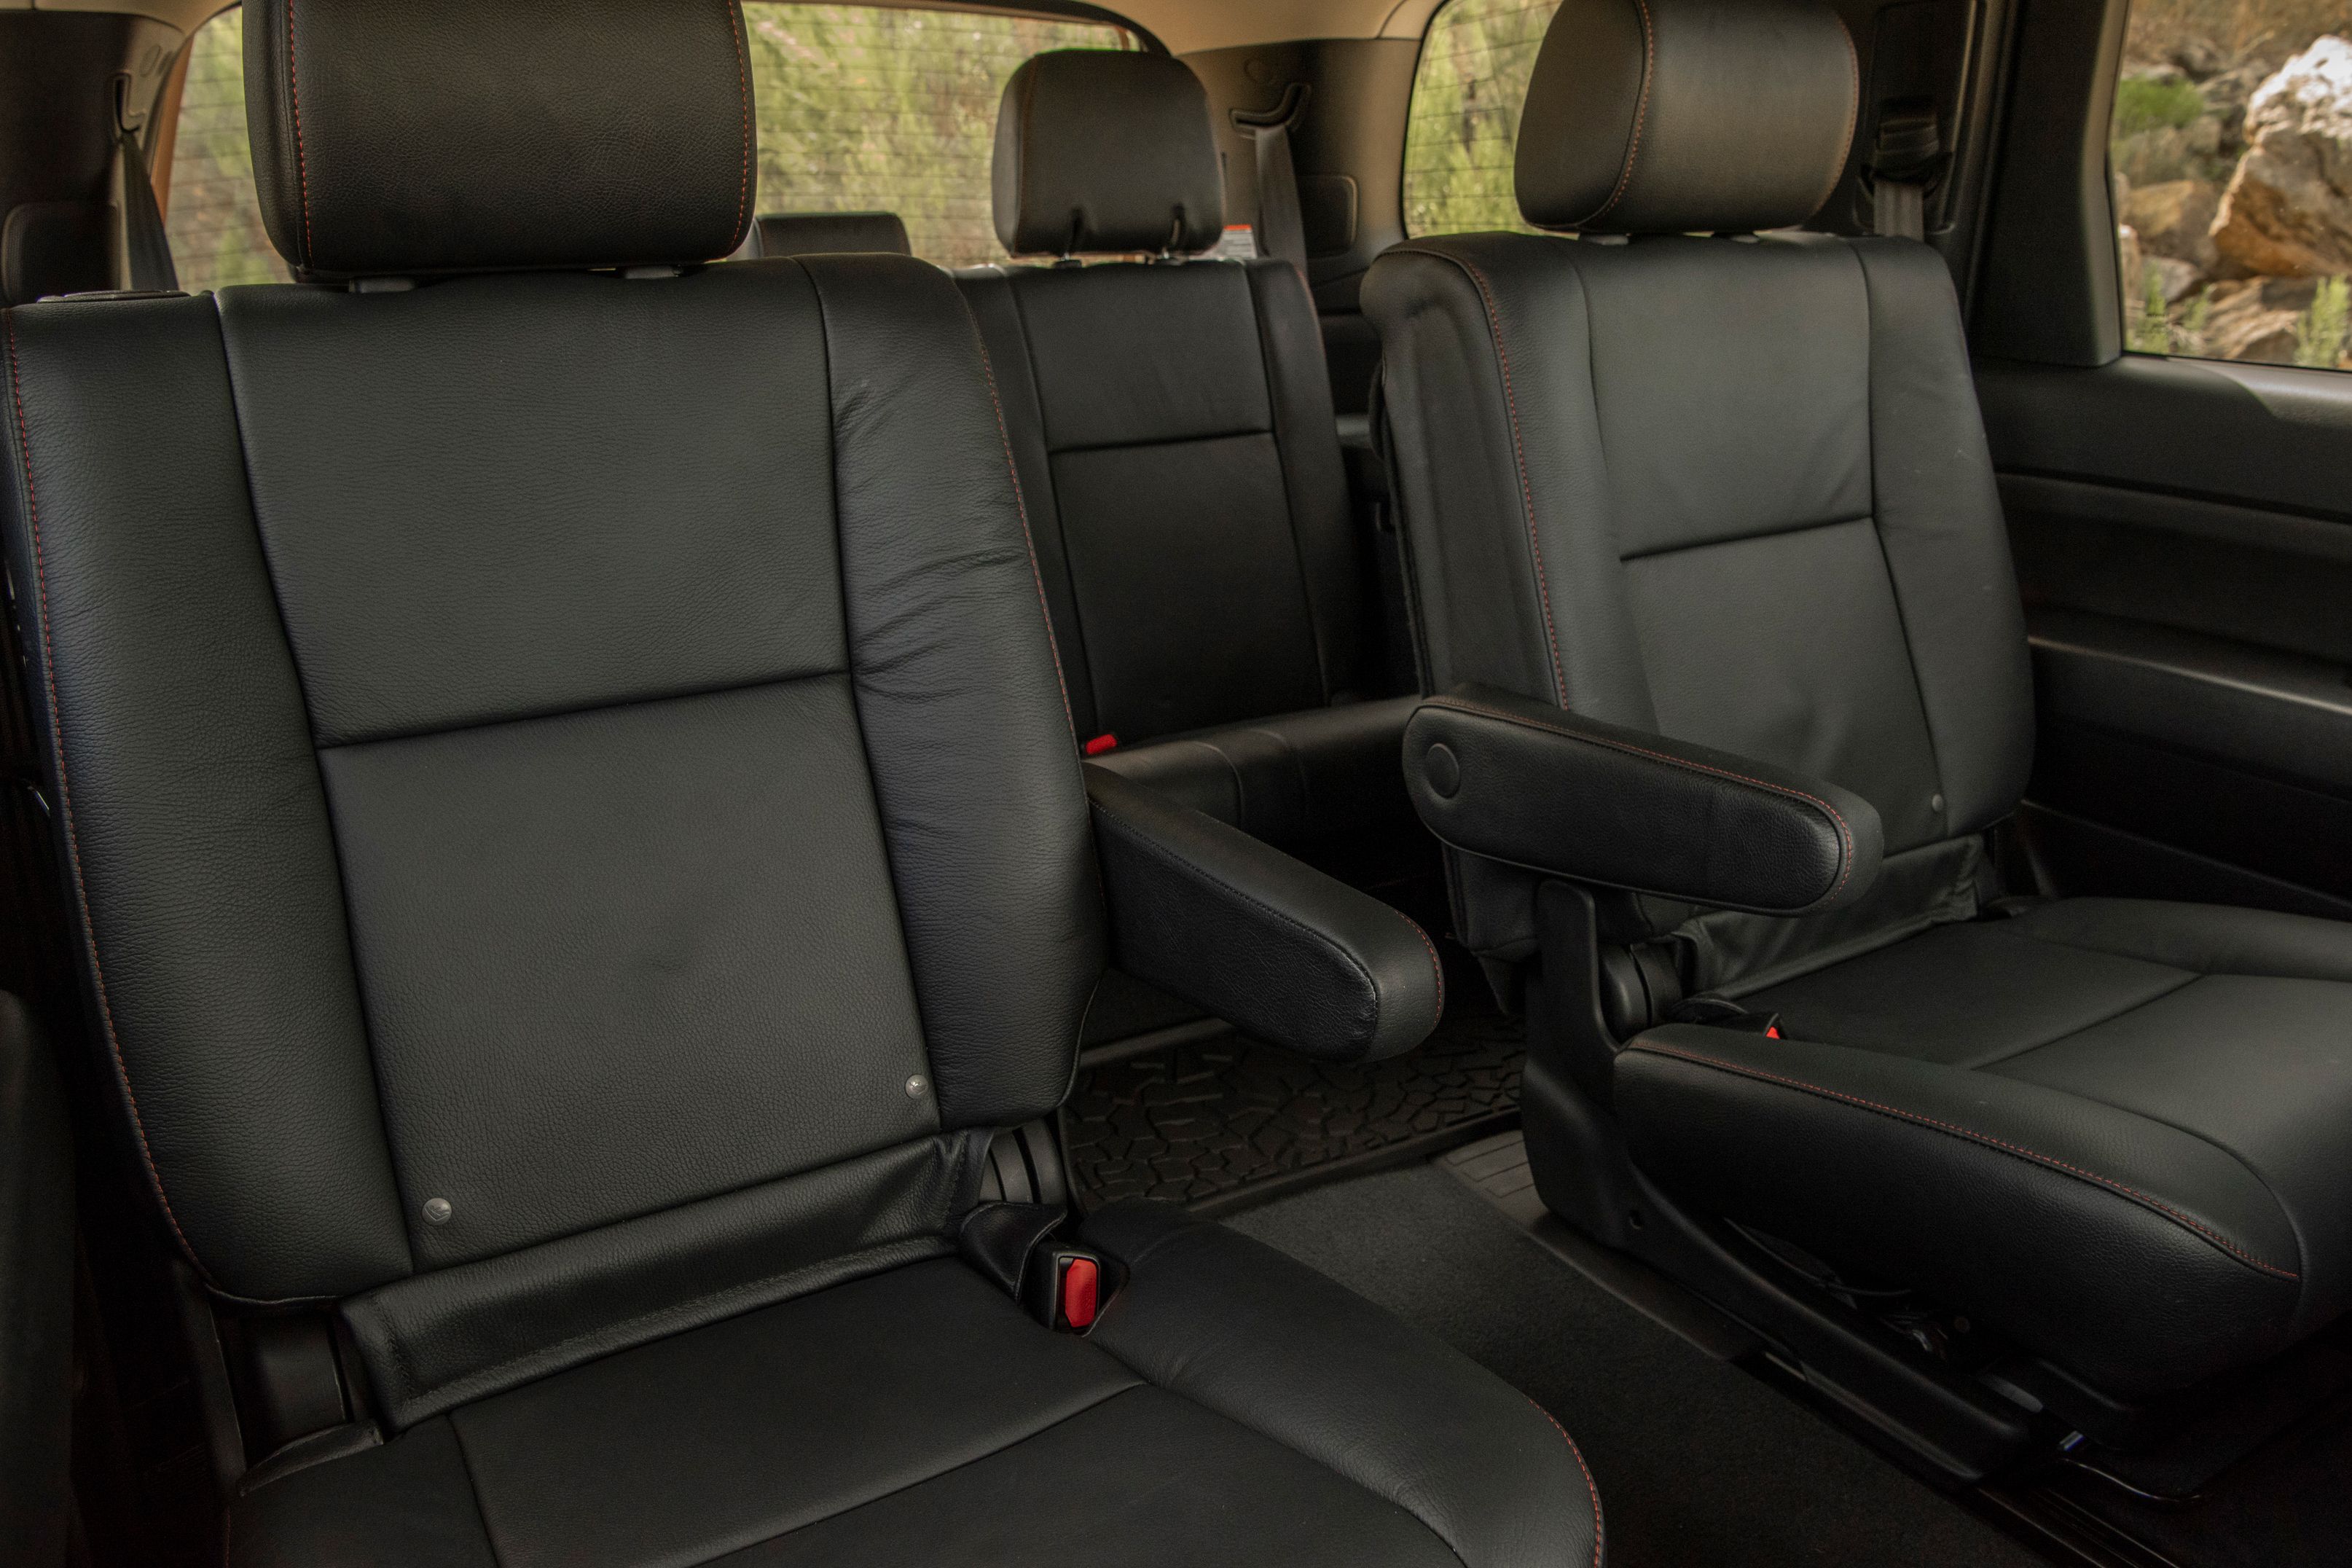 Introduce 181+ images toyota sequoia captains chairs In.thptnganamst